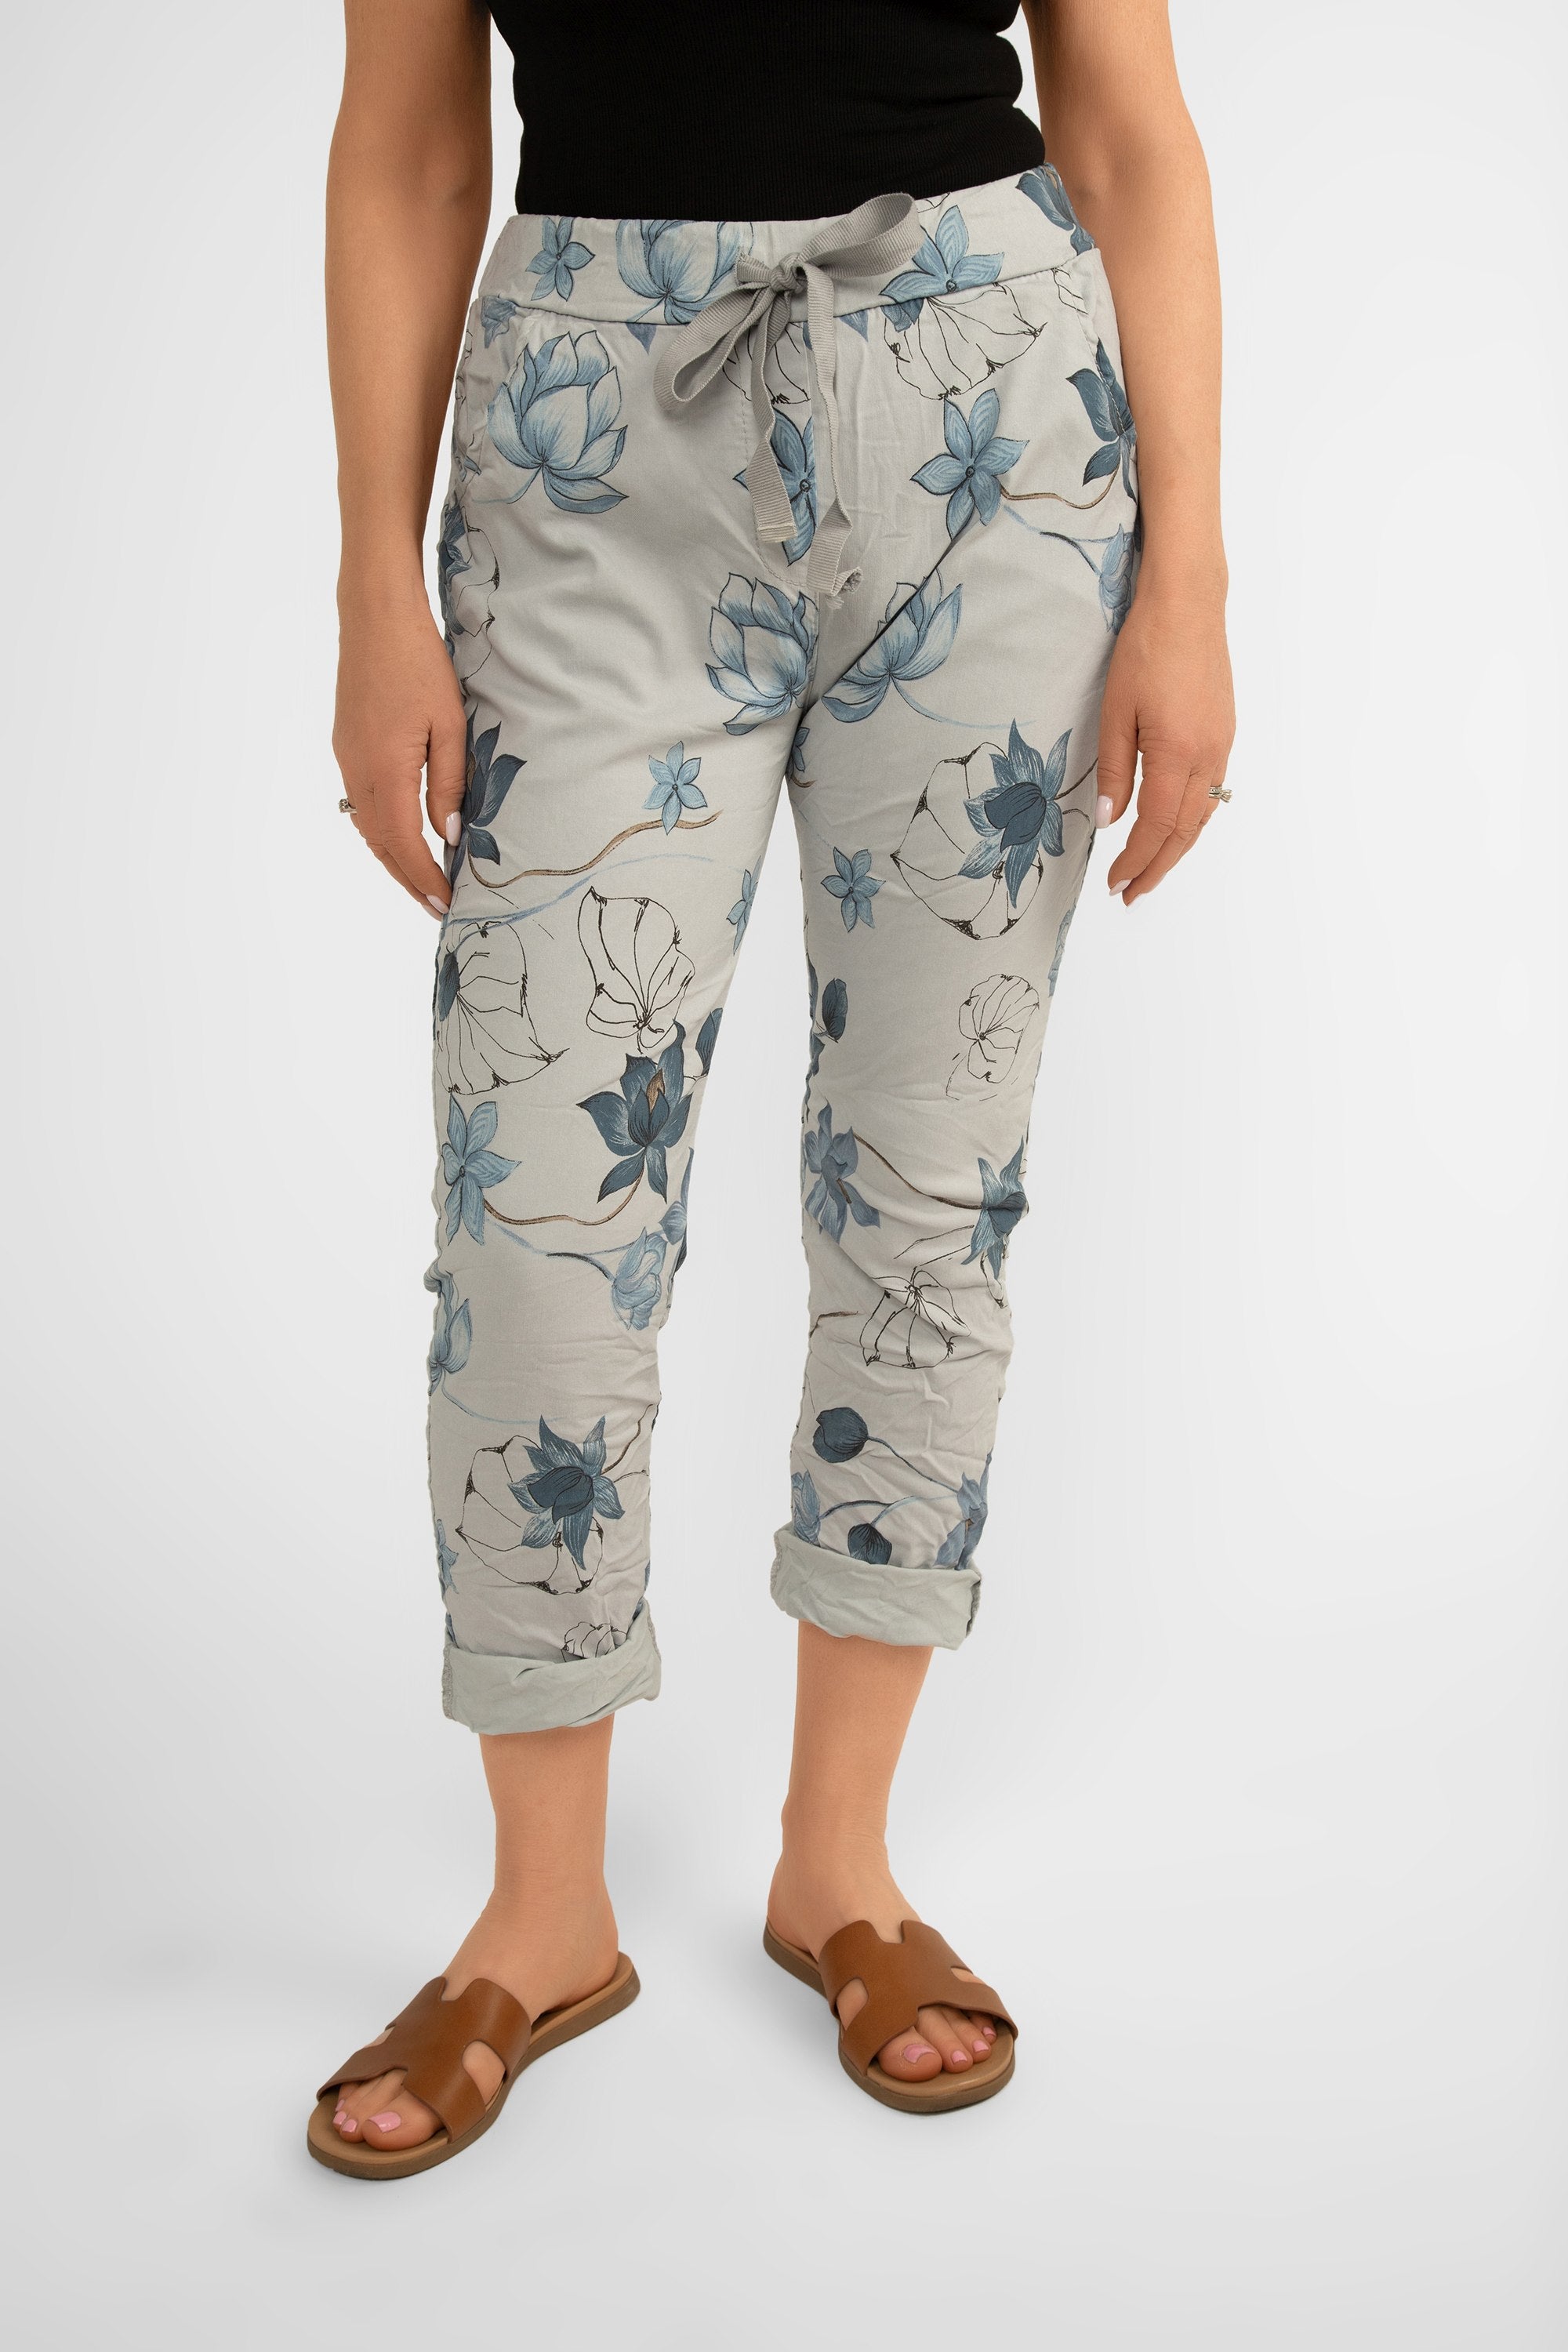 Front view of Bella Amore (21036) Women's Pull On Crinkle Pants with Side Pockets, Rolled Hem, and Blue Lotus Flower Print in Grey